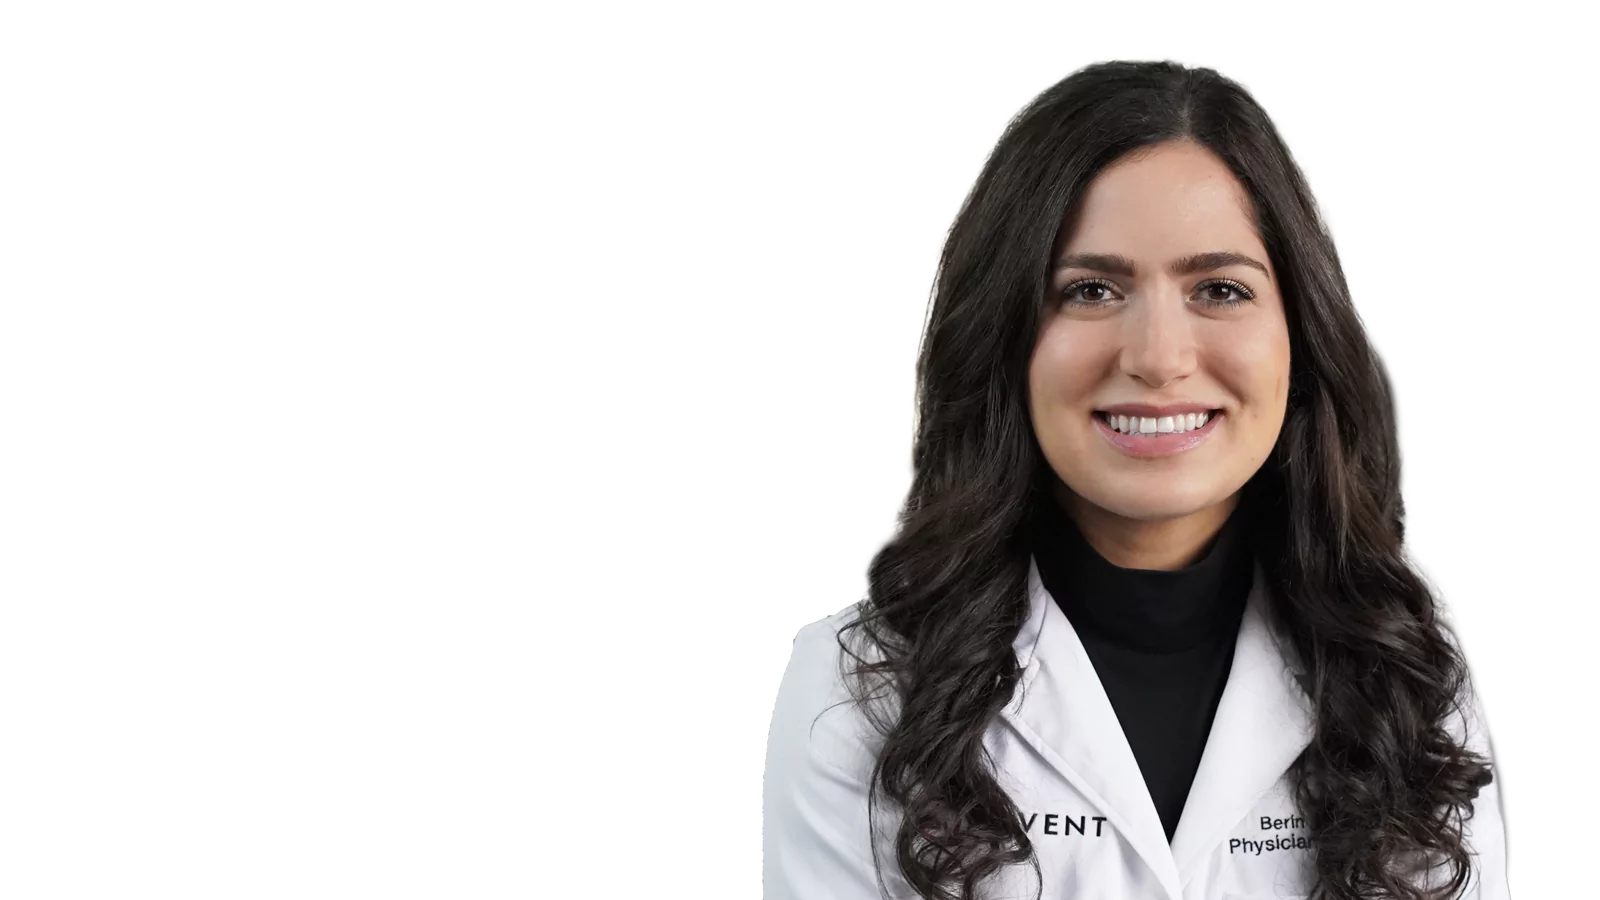 ADVENT Provider - Physician Assistant - Chicago - Berin Simsek